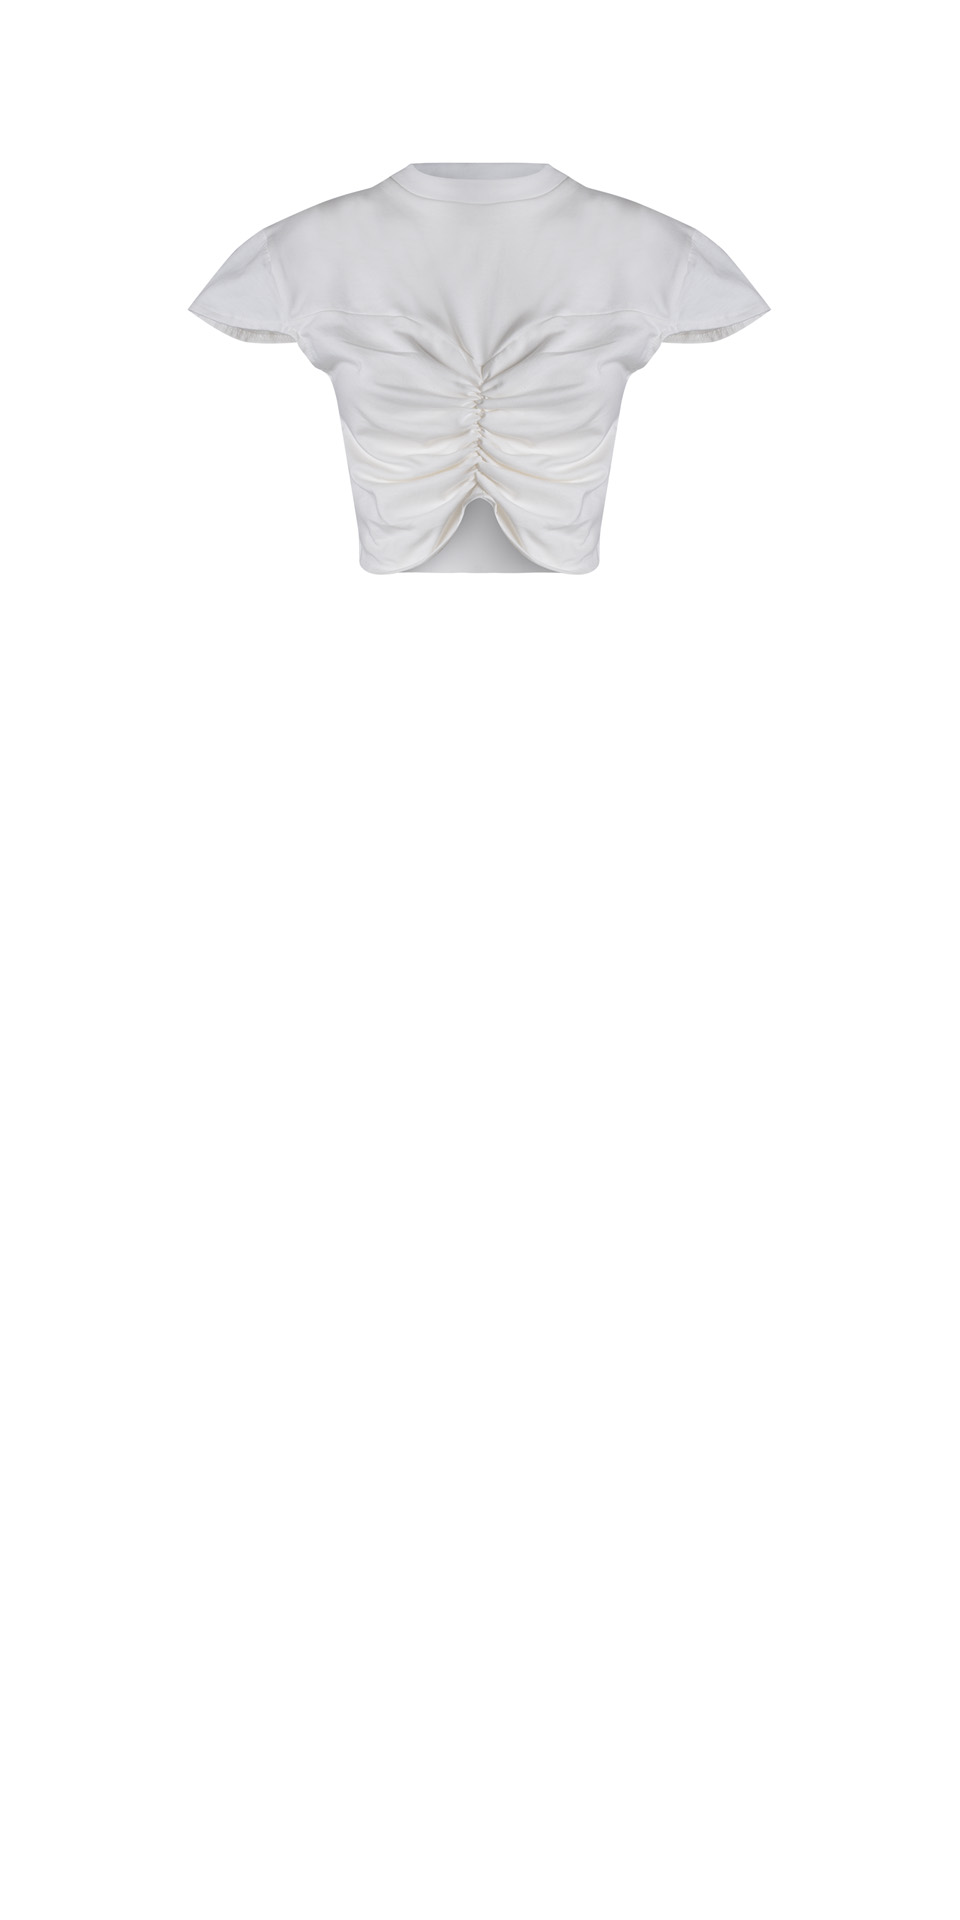 REVERSIBLE – THE BUTTERFLY TEE WHITE